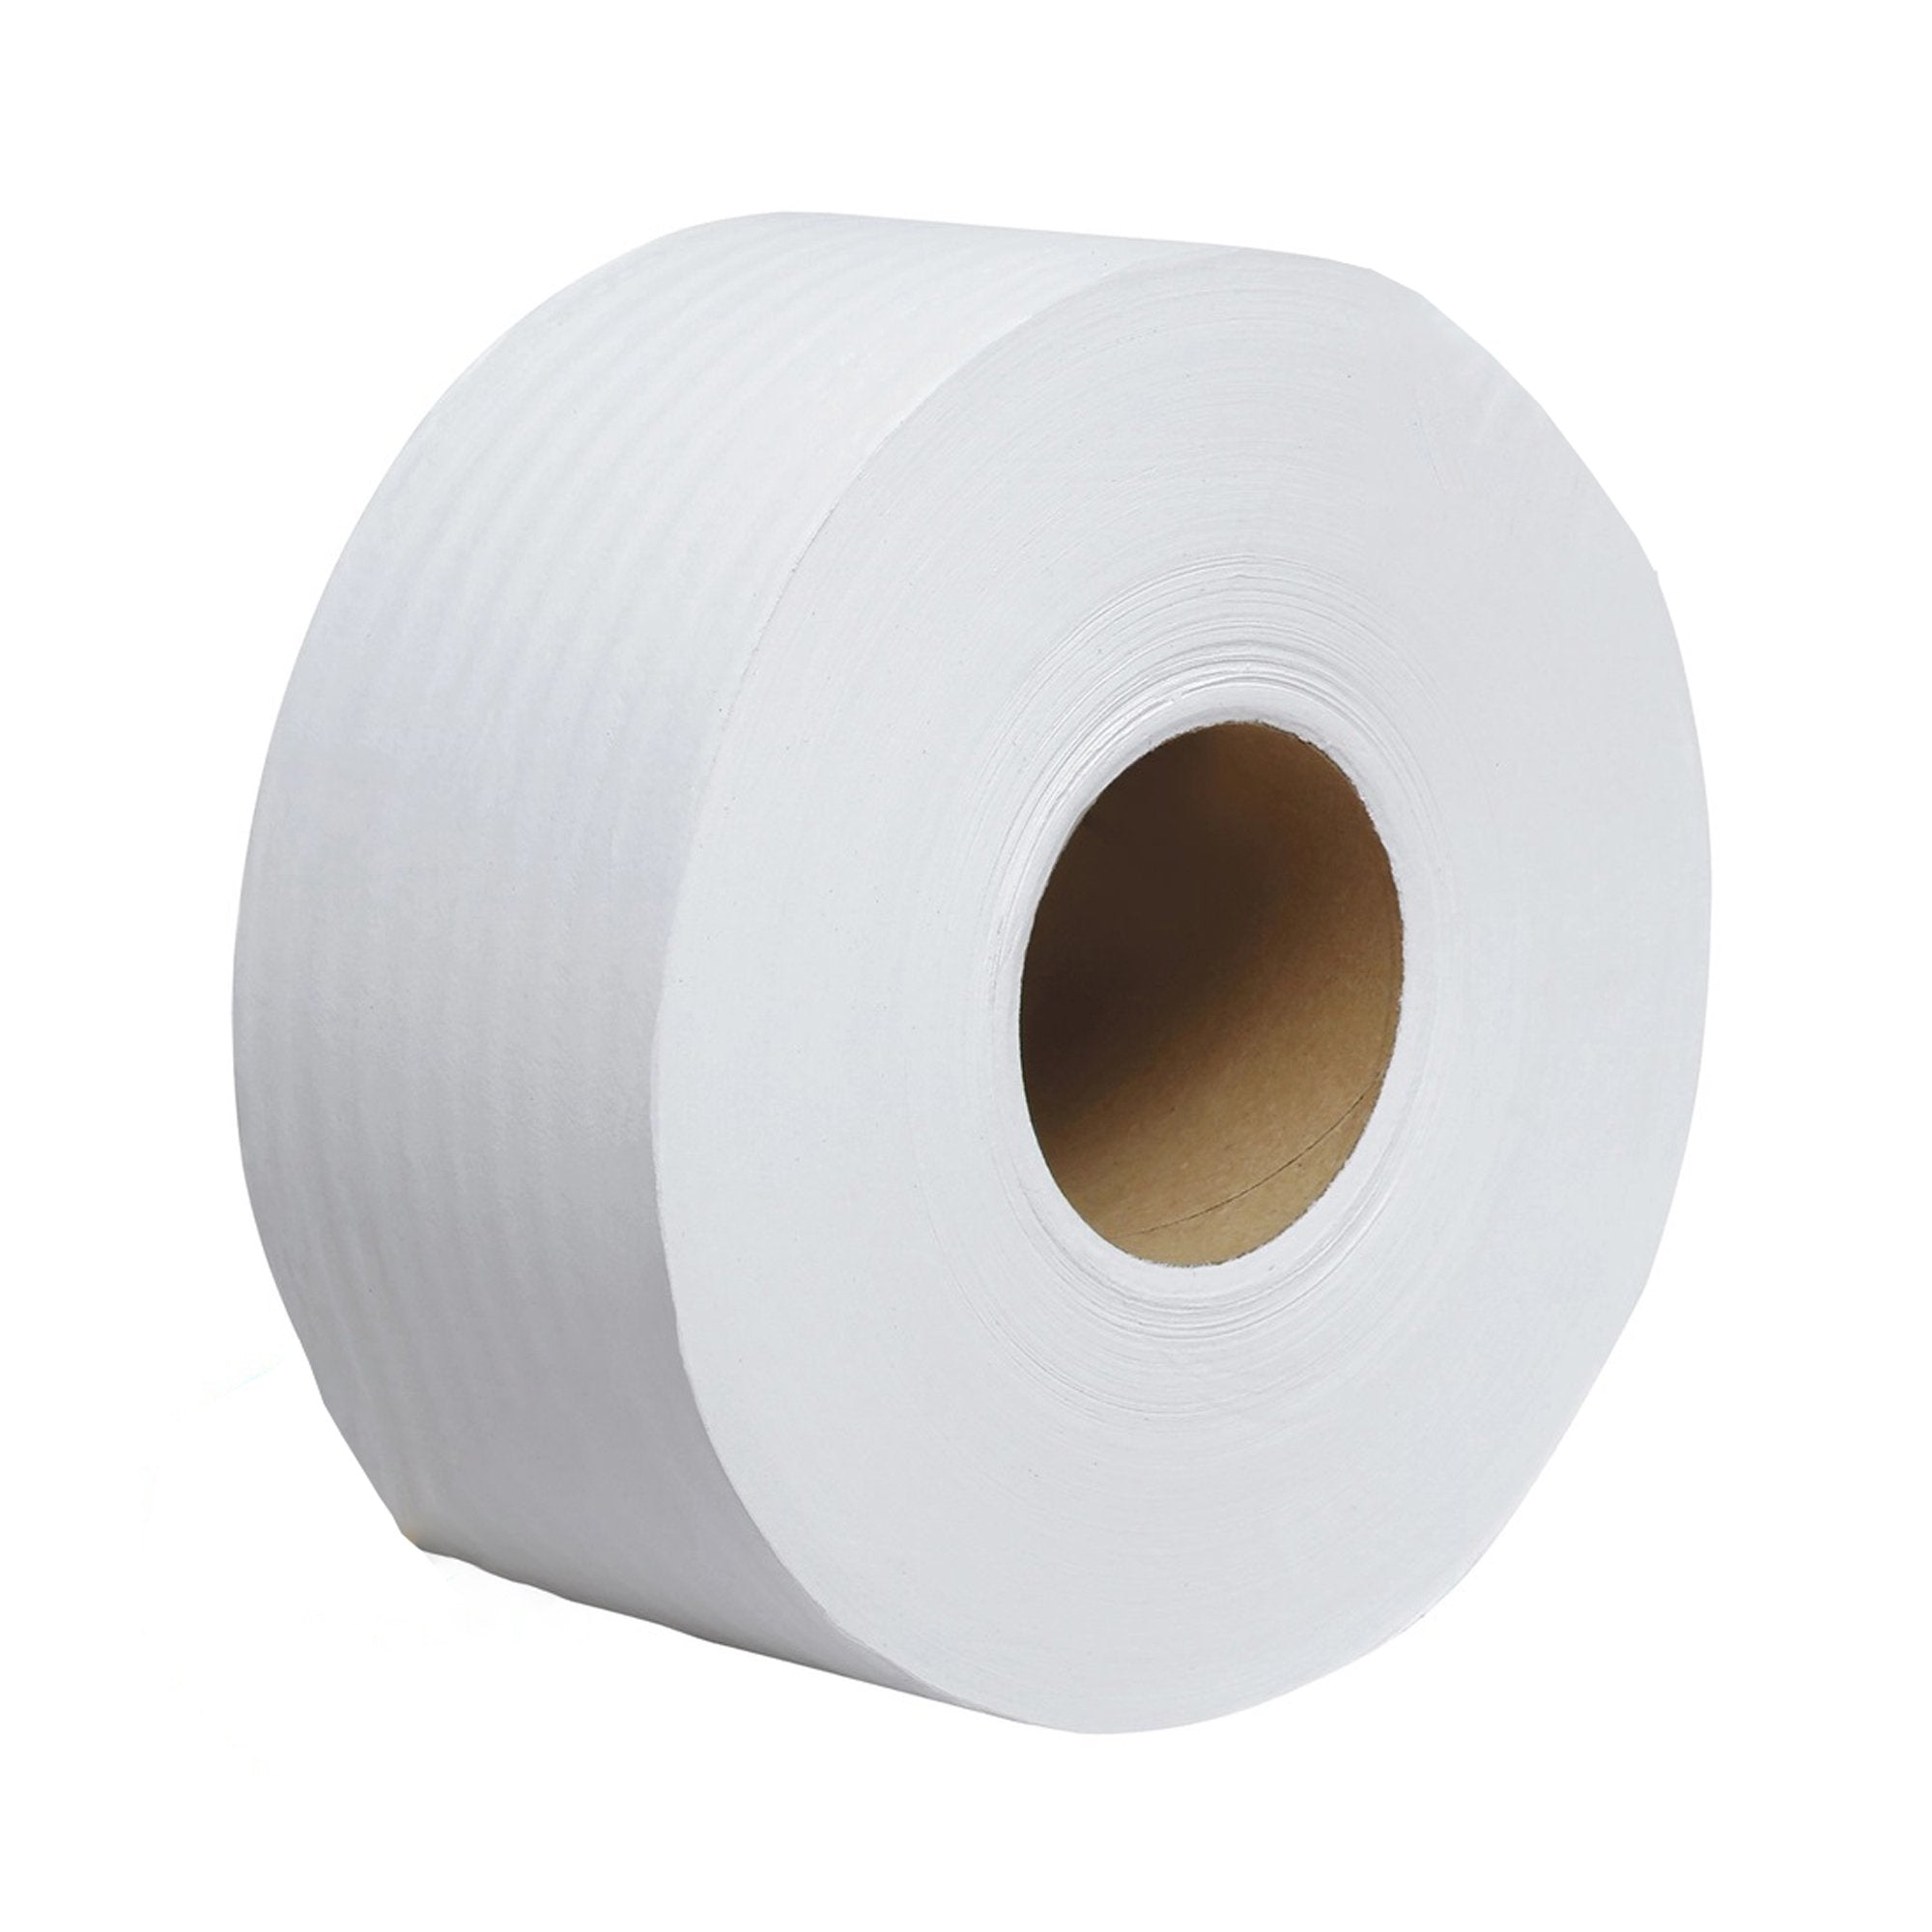 Toilet Tissue Scott® Essential JRT White 2-Ply Jumbo Size Cored Roll Continuous Sheet 3-11/20 Inch X 1000 Foot